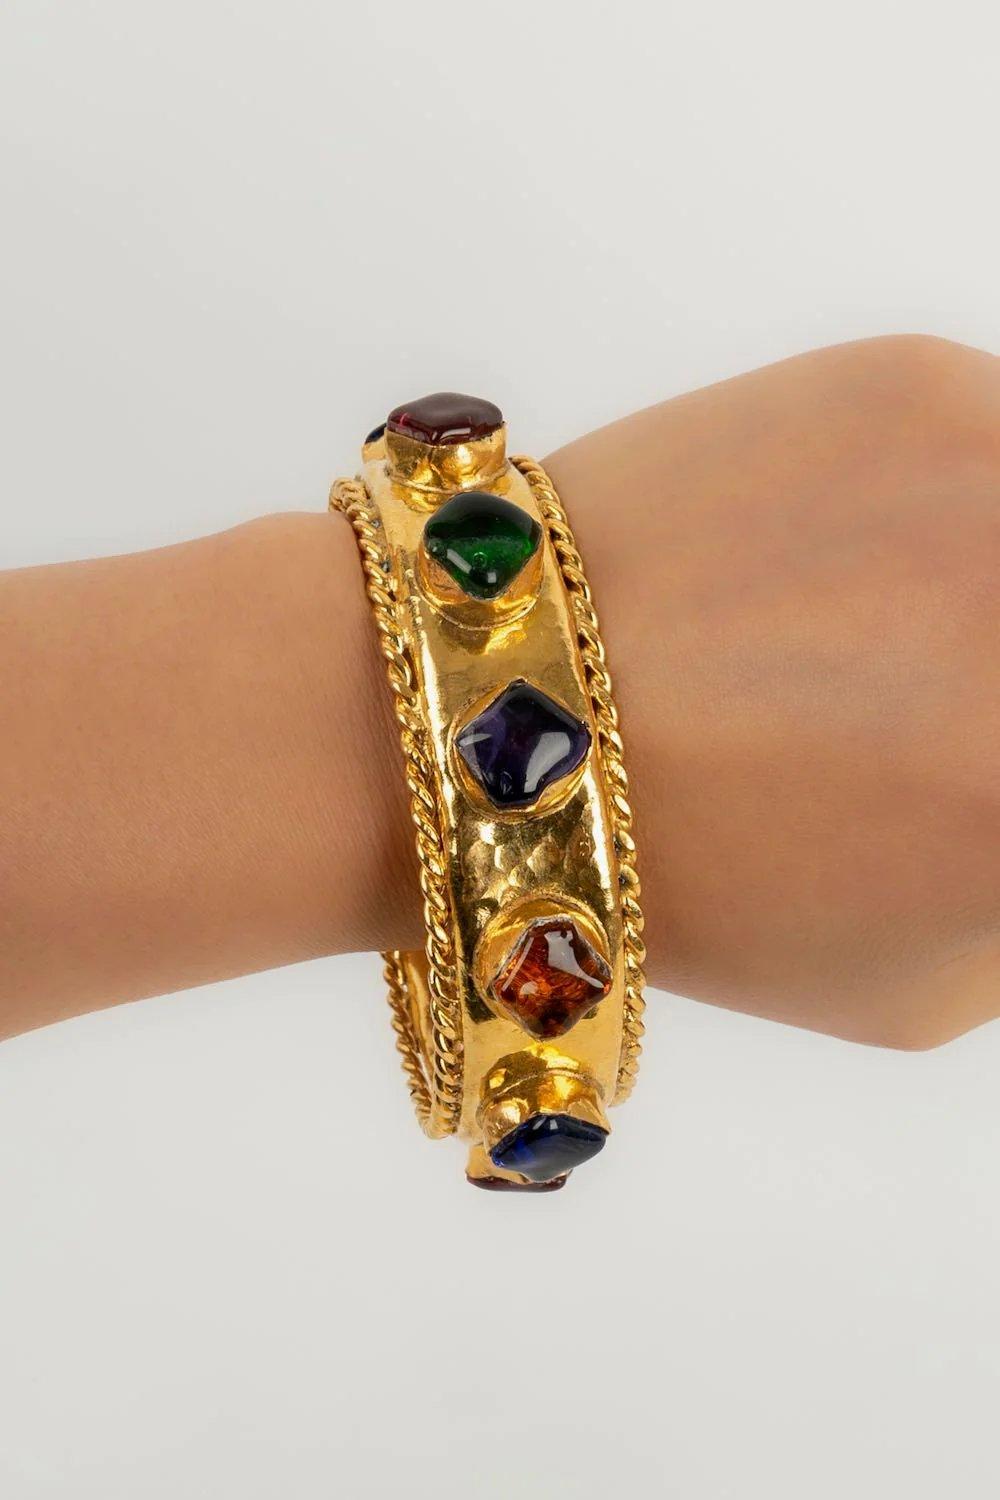 Chanel - Haute Couture bracelet in gilded metal and multicolored glass paste. Jewel of fashion show, not signed.

Additional information:
Dimensions: Ø 7.5 cm
Condition: Very good condition
Seller Ref number: BRAB91